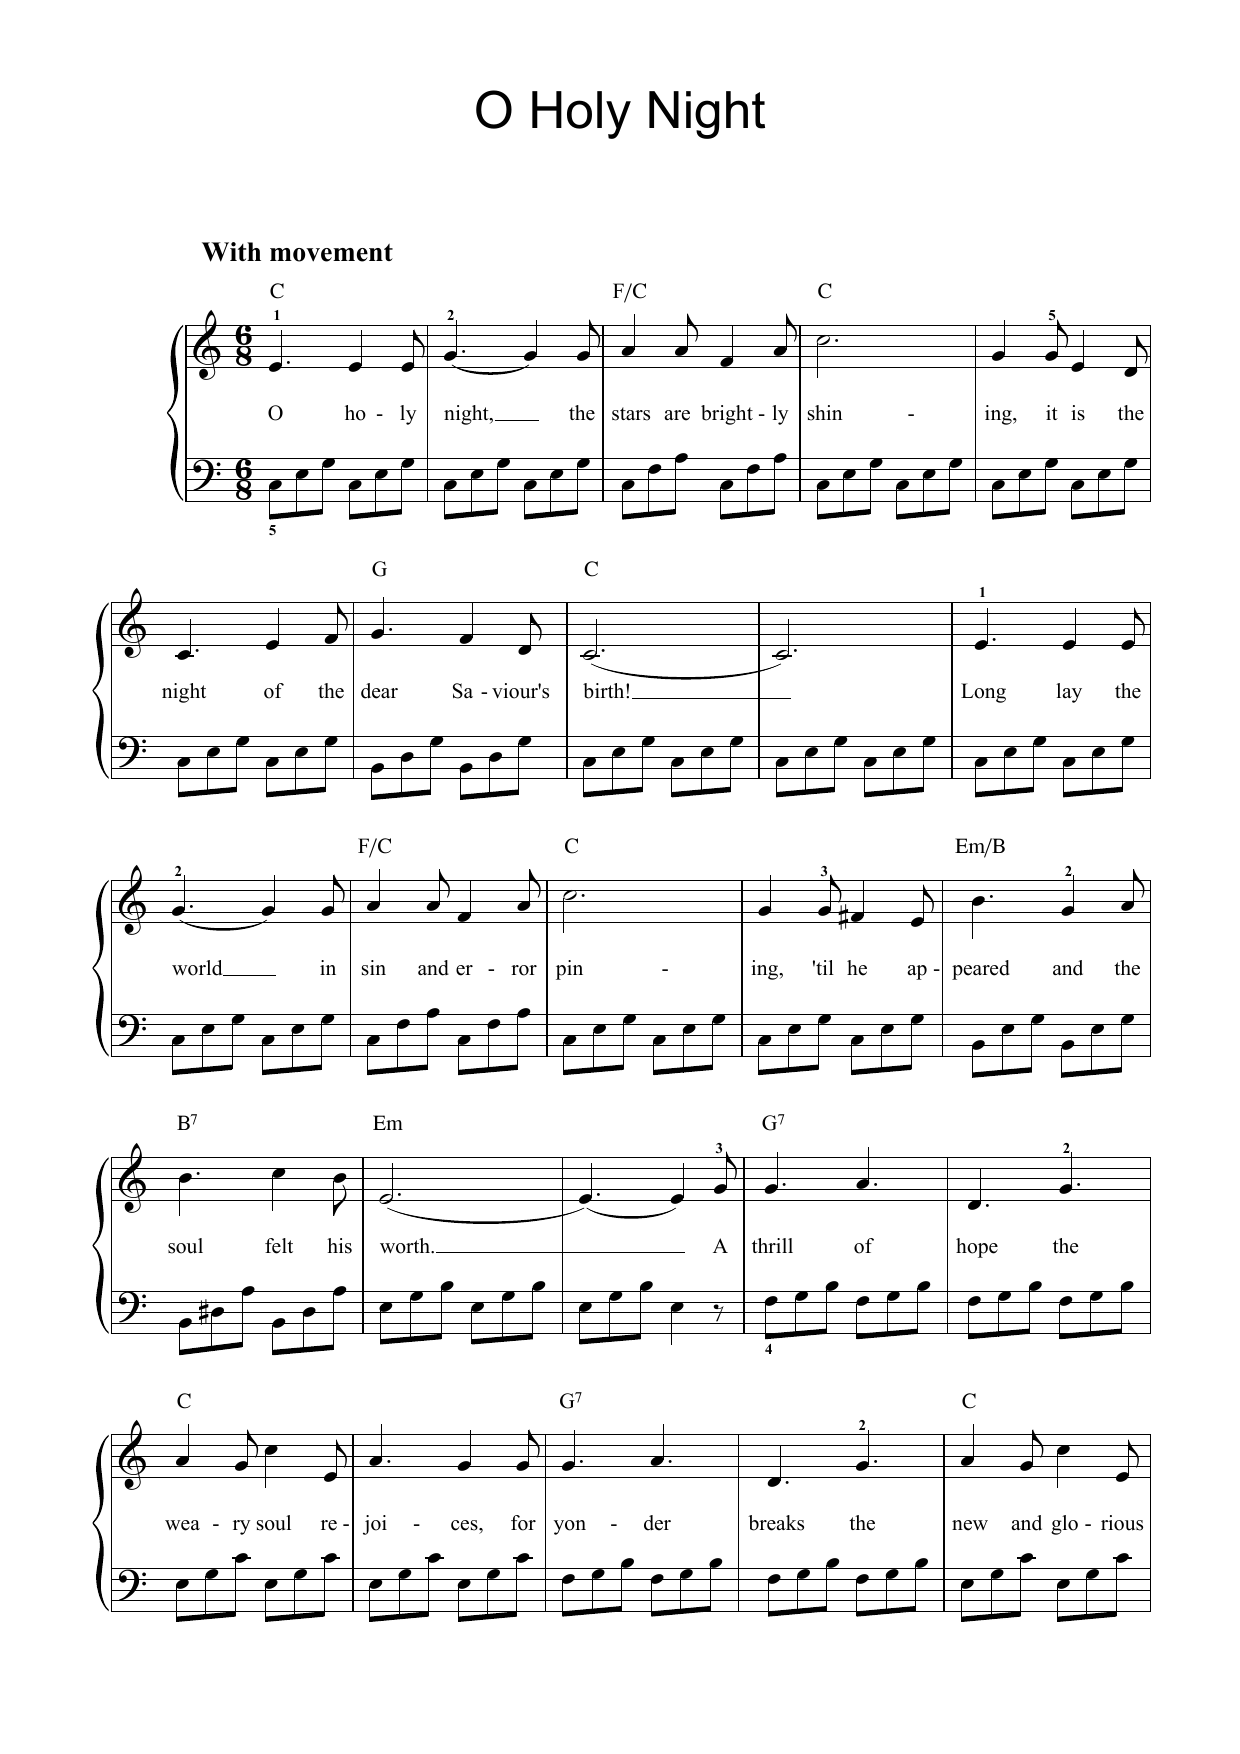 Adolphe Adam O Holy Night sheet music notes and chords. Download Printable PDF.